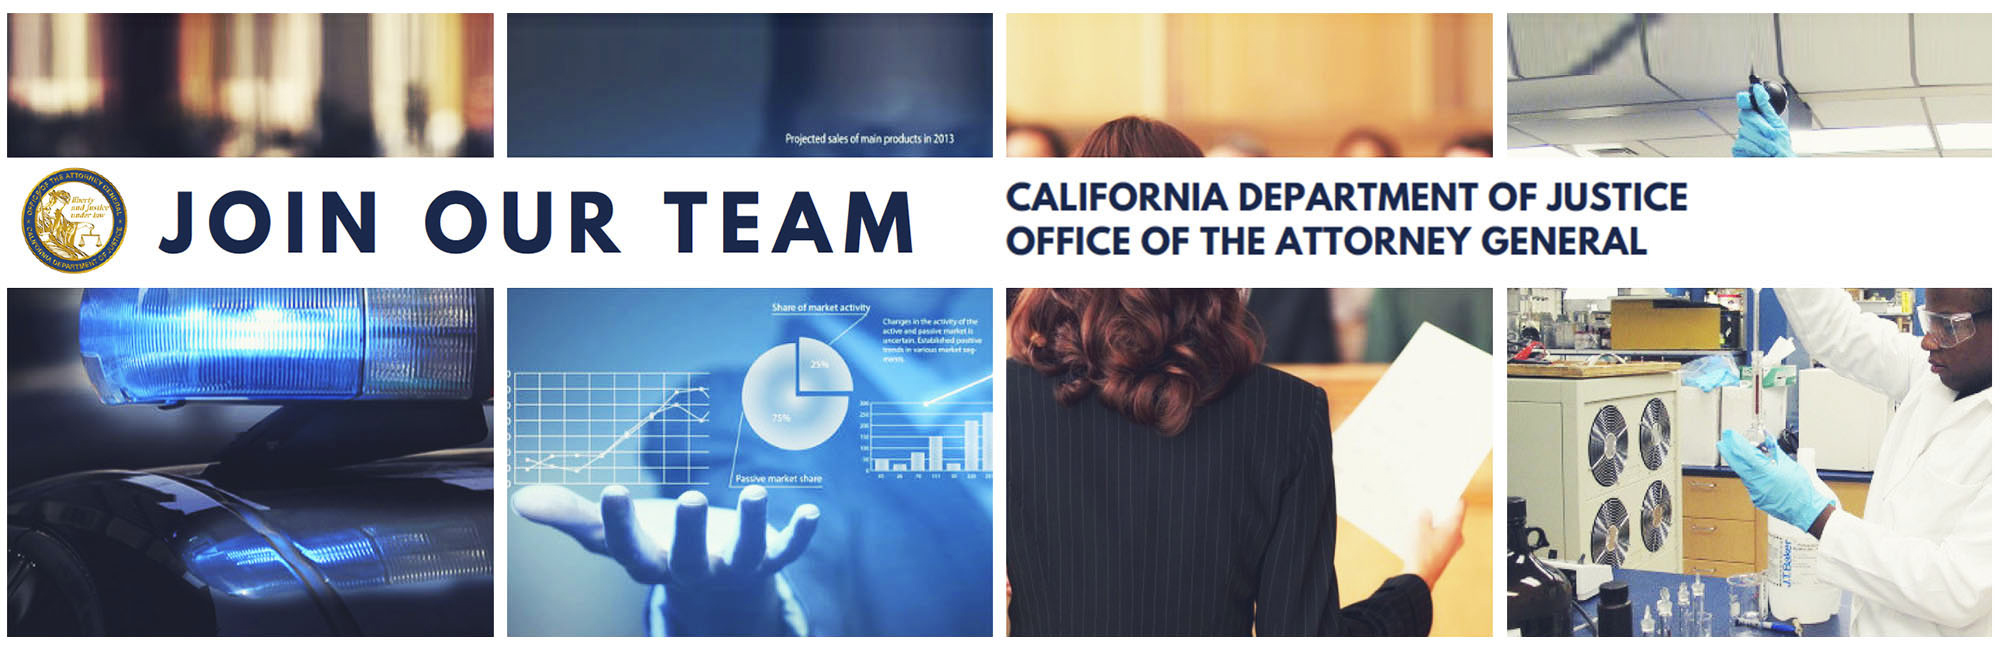 Join our team - California Department of Justice - Office of the Attorney General.